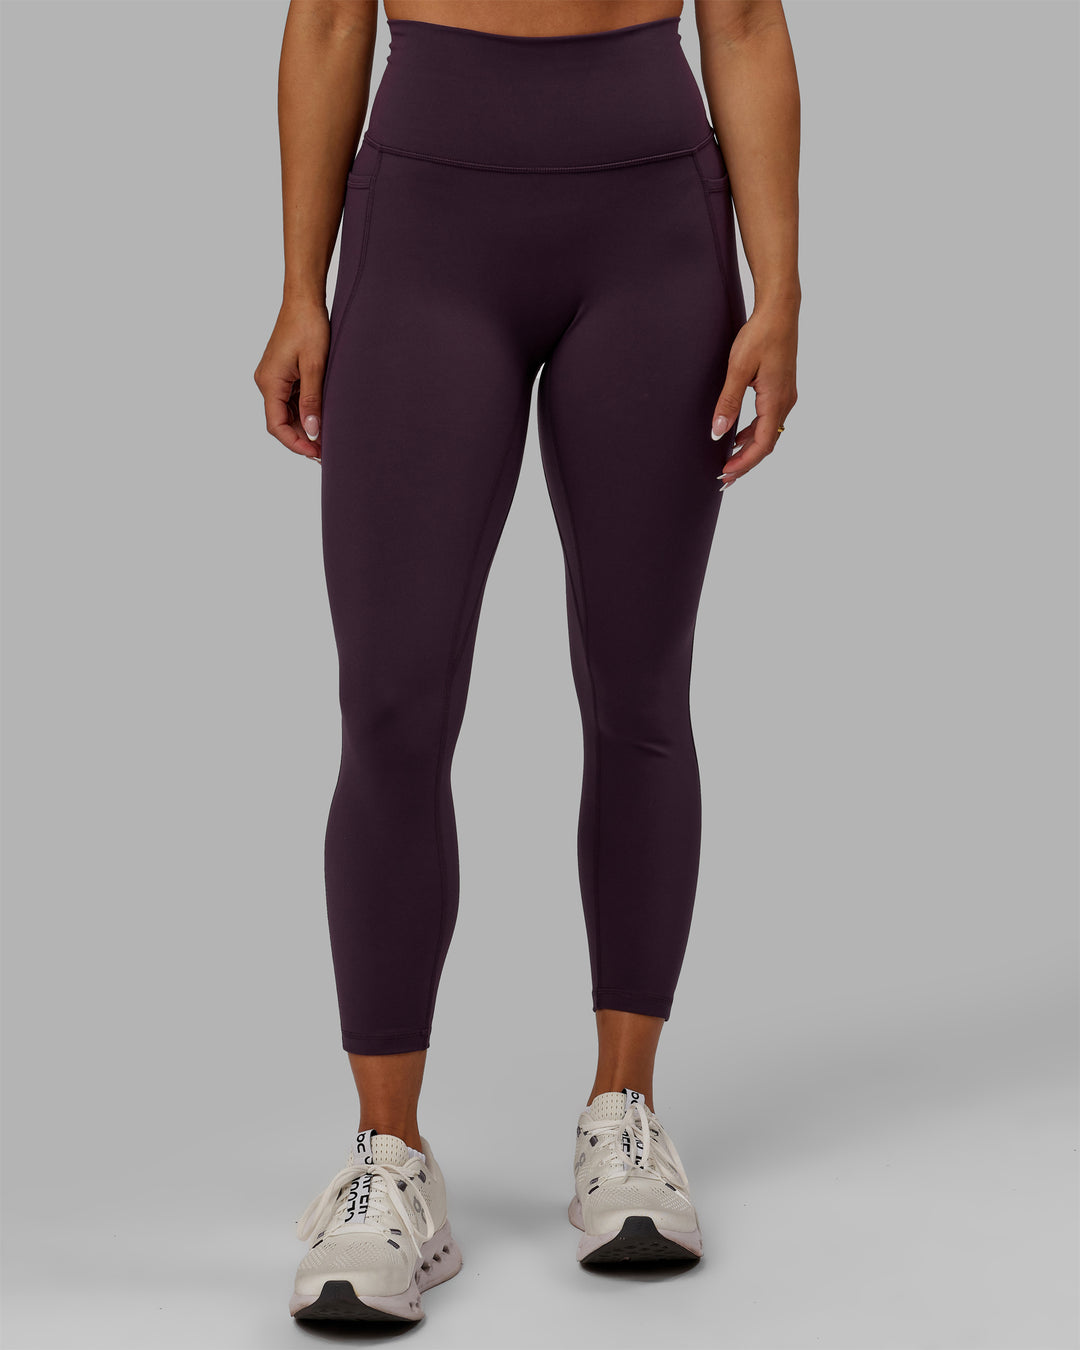 Woman wearing Fusion 7/8 Length Tights - Midnight Plum